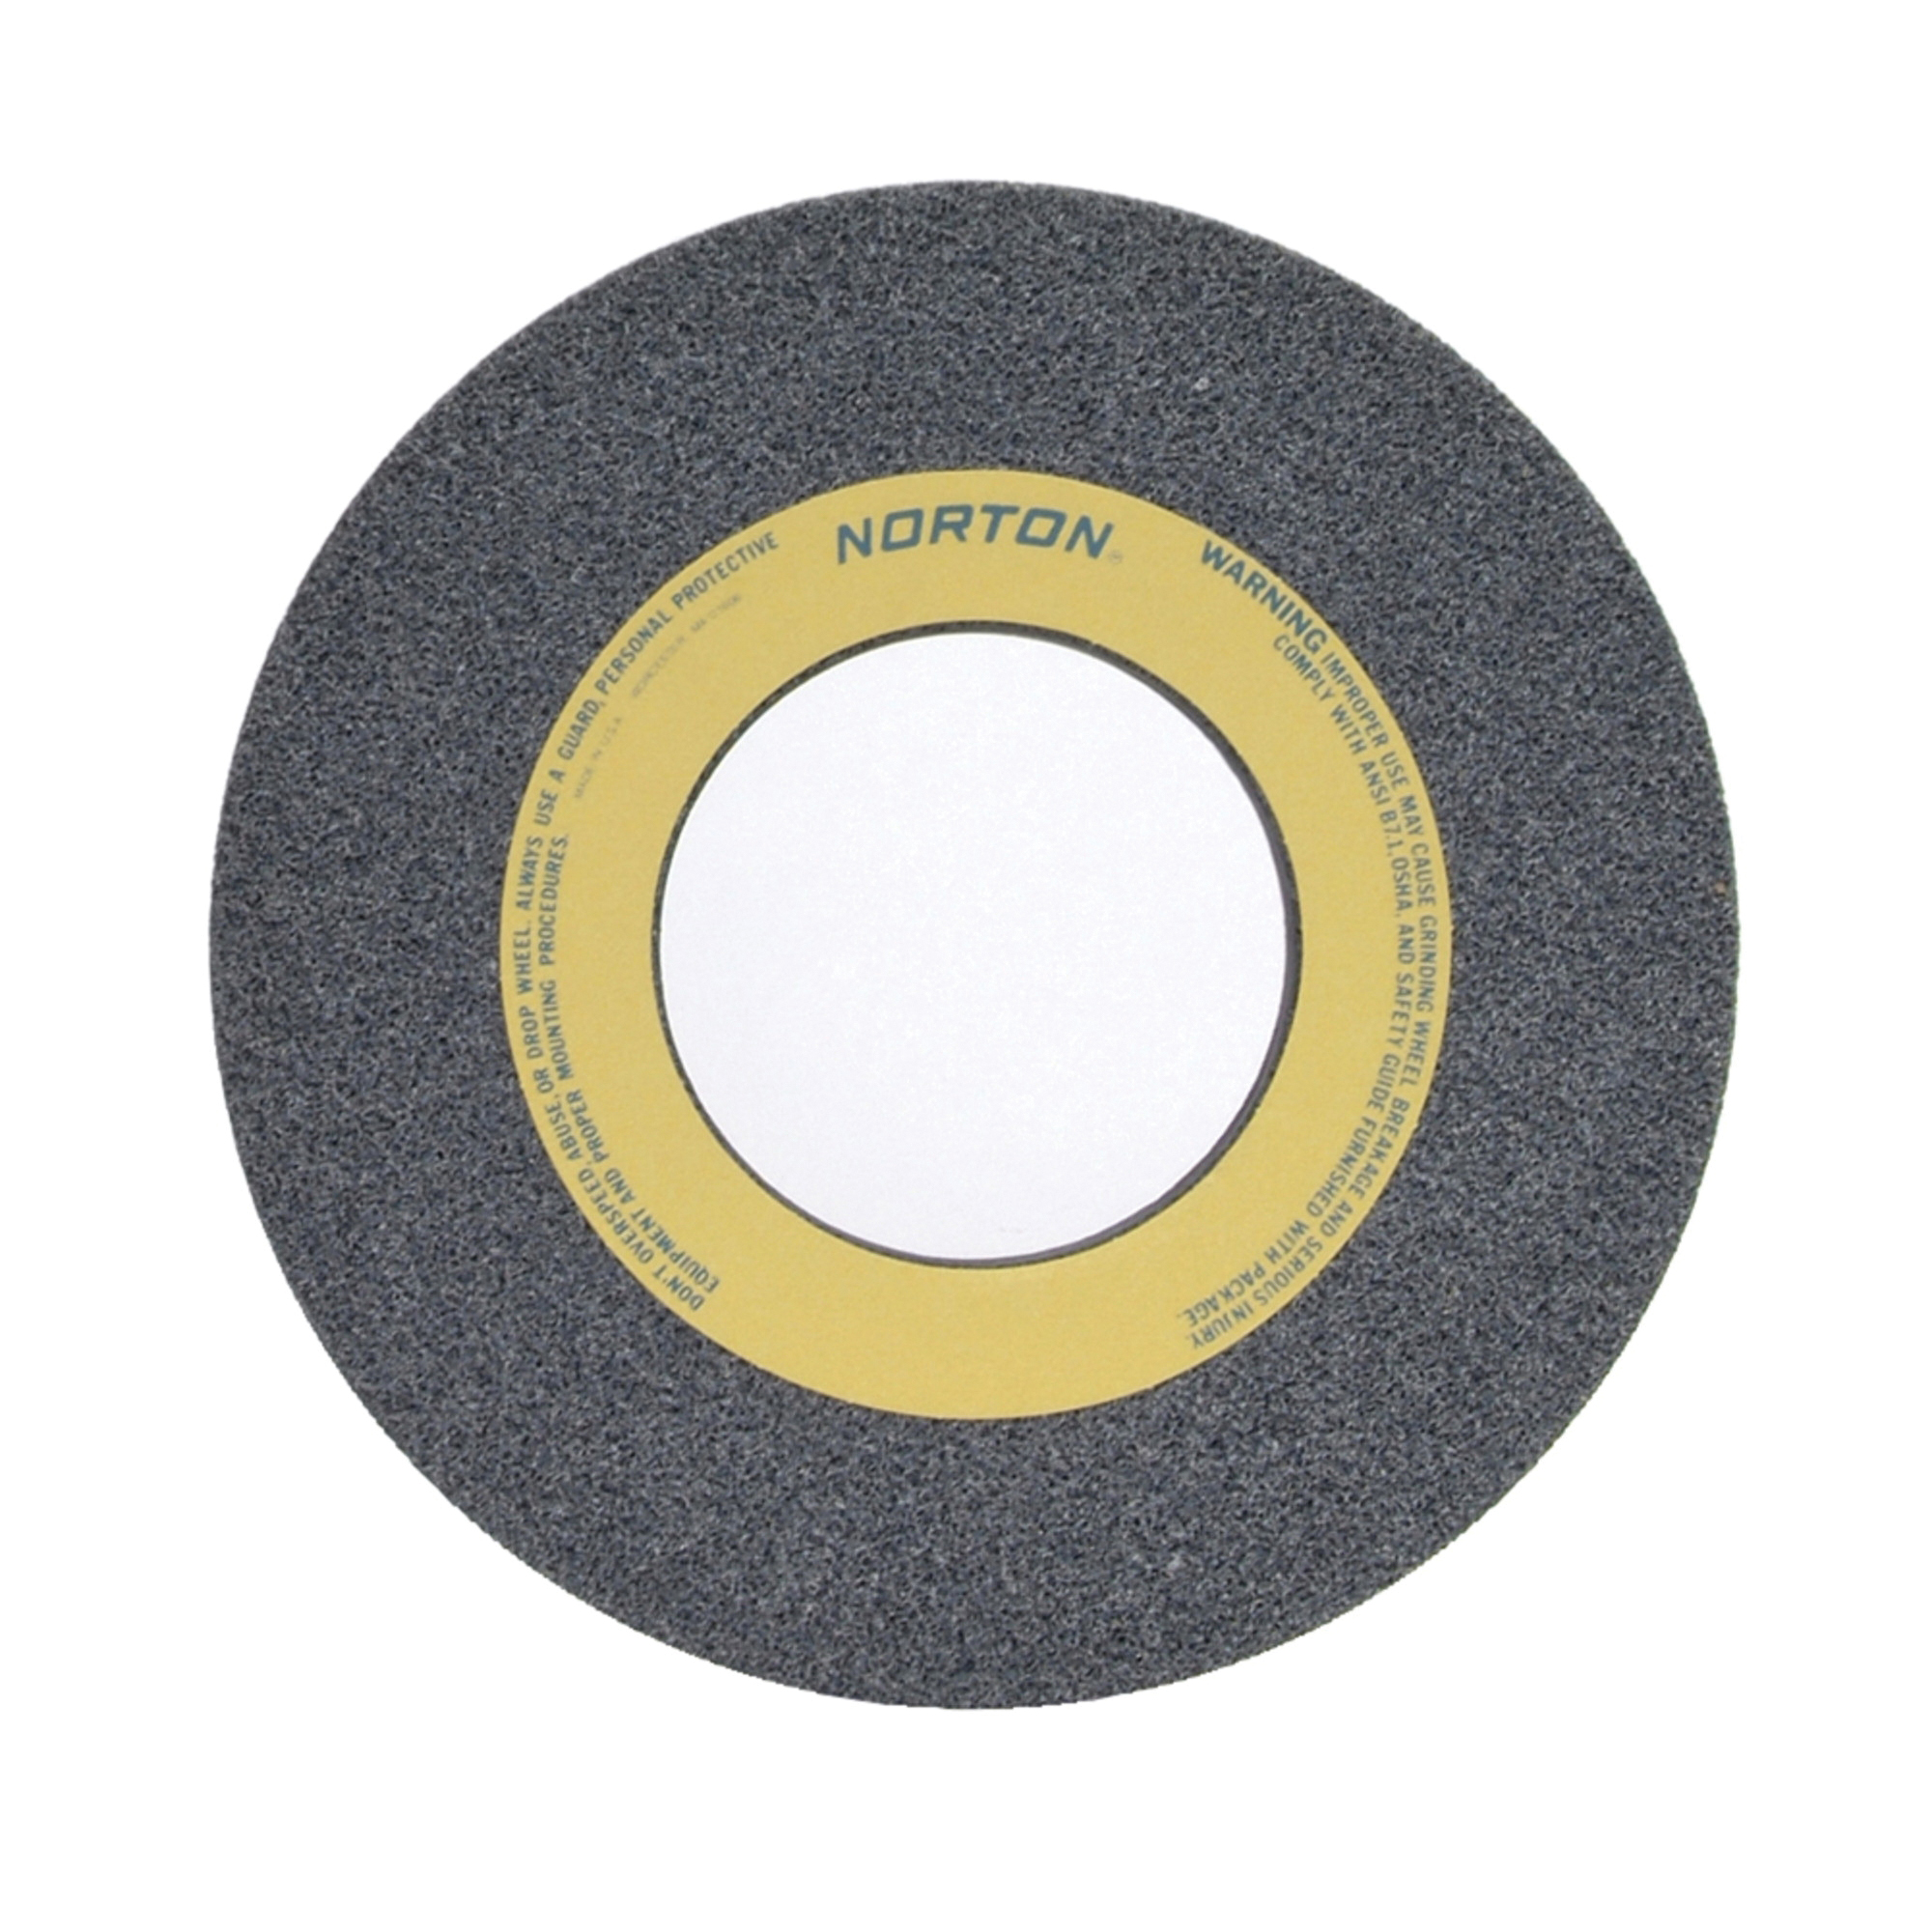 Norton® 66253364246 32A Straight Toolroom Wheel, 14 in Dia x 1-1/2 in THK, 5 in Center Hole, 80 Grit, Aluminum Oxide Abrasive